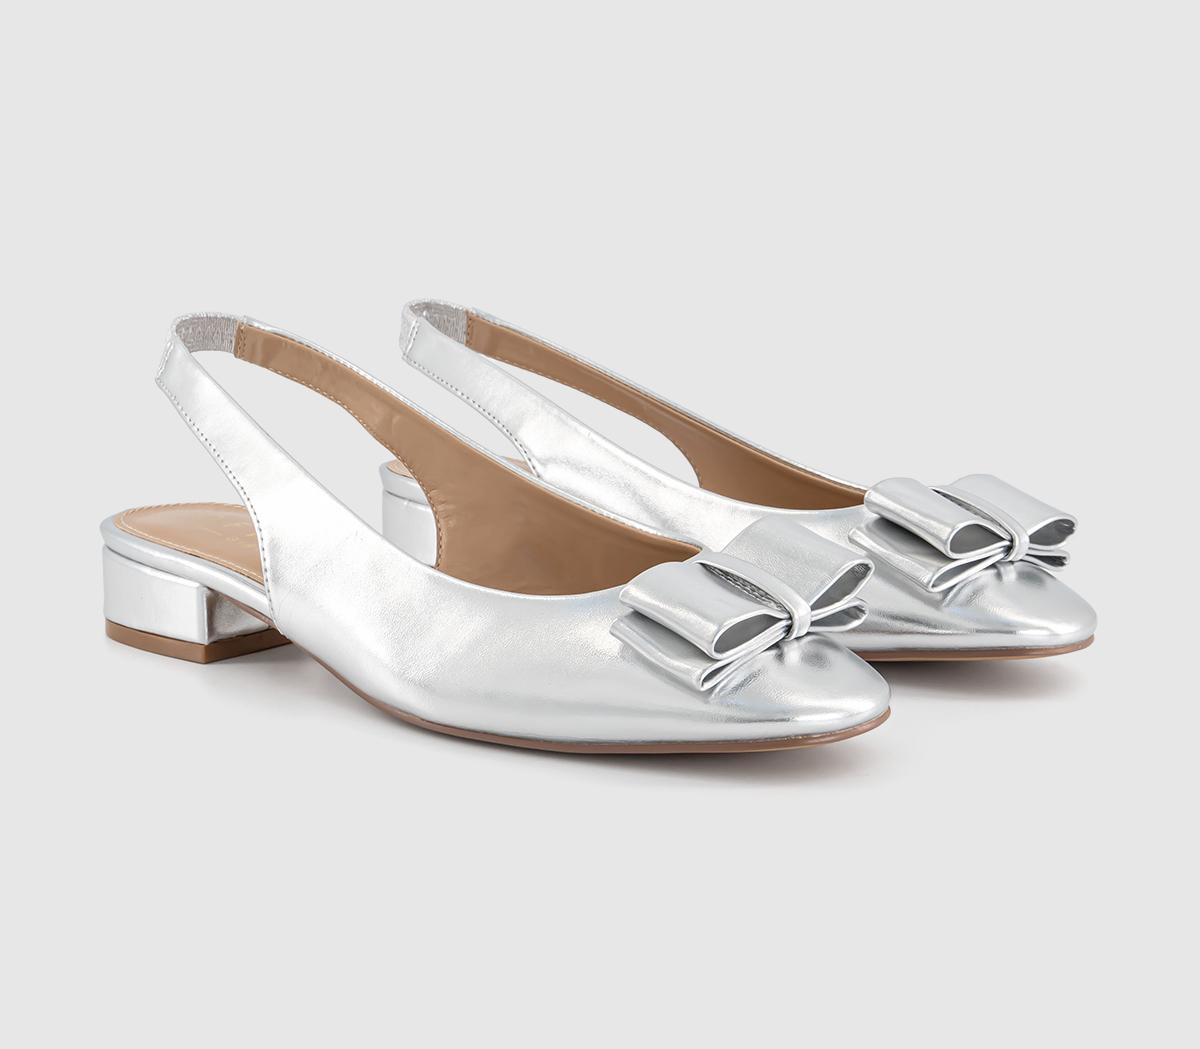 OFFICE Womens Fiesta Bow Slingback Ballerina Shoes Silver Patent, 3